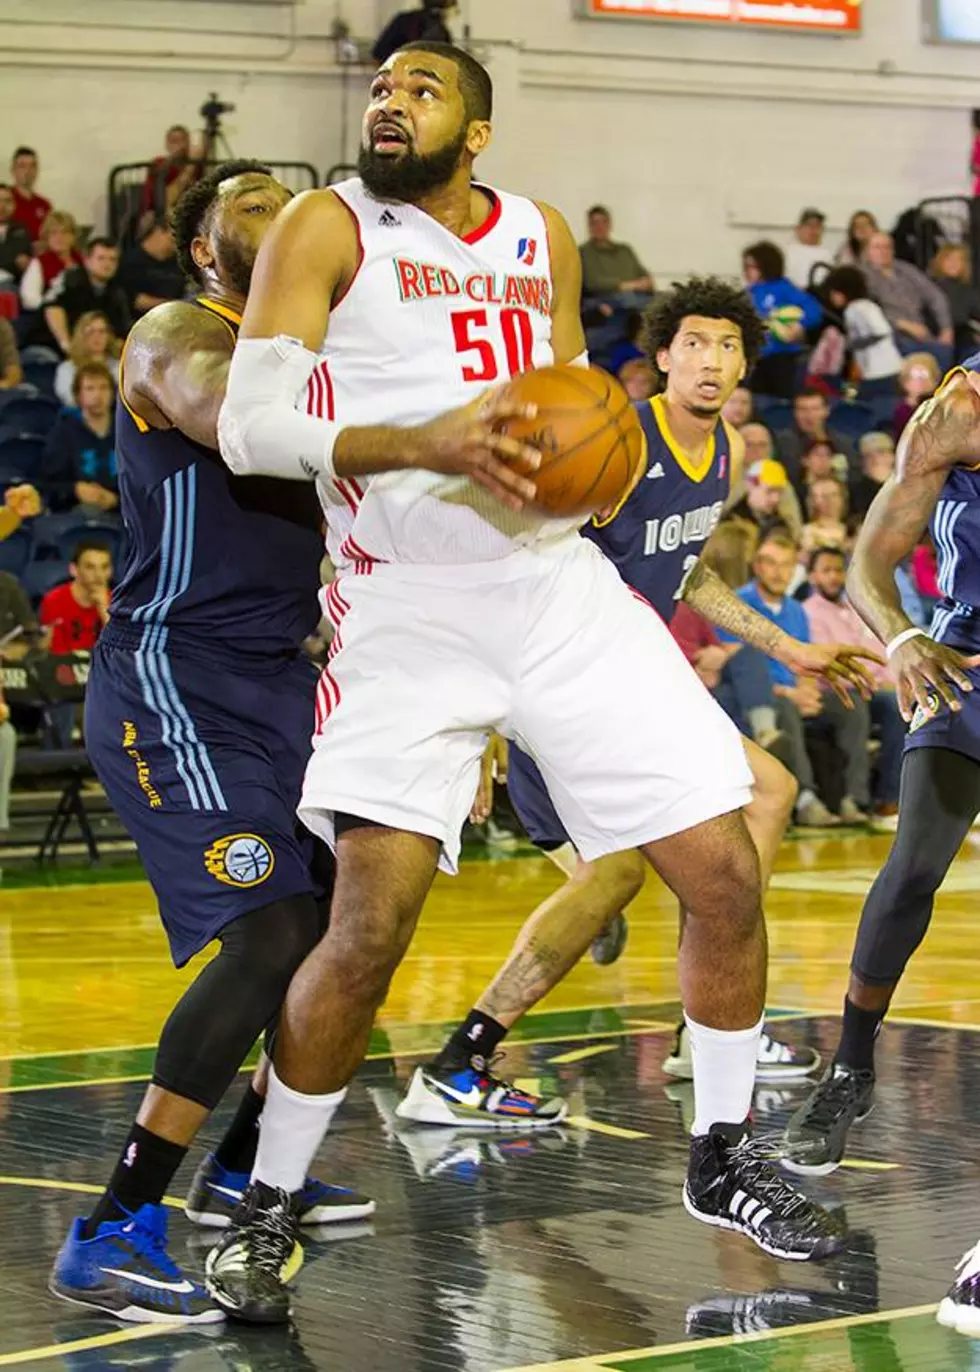 Red Claws Get 30th Win [VIDEO]